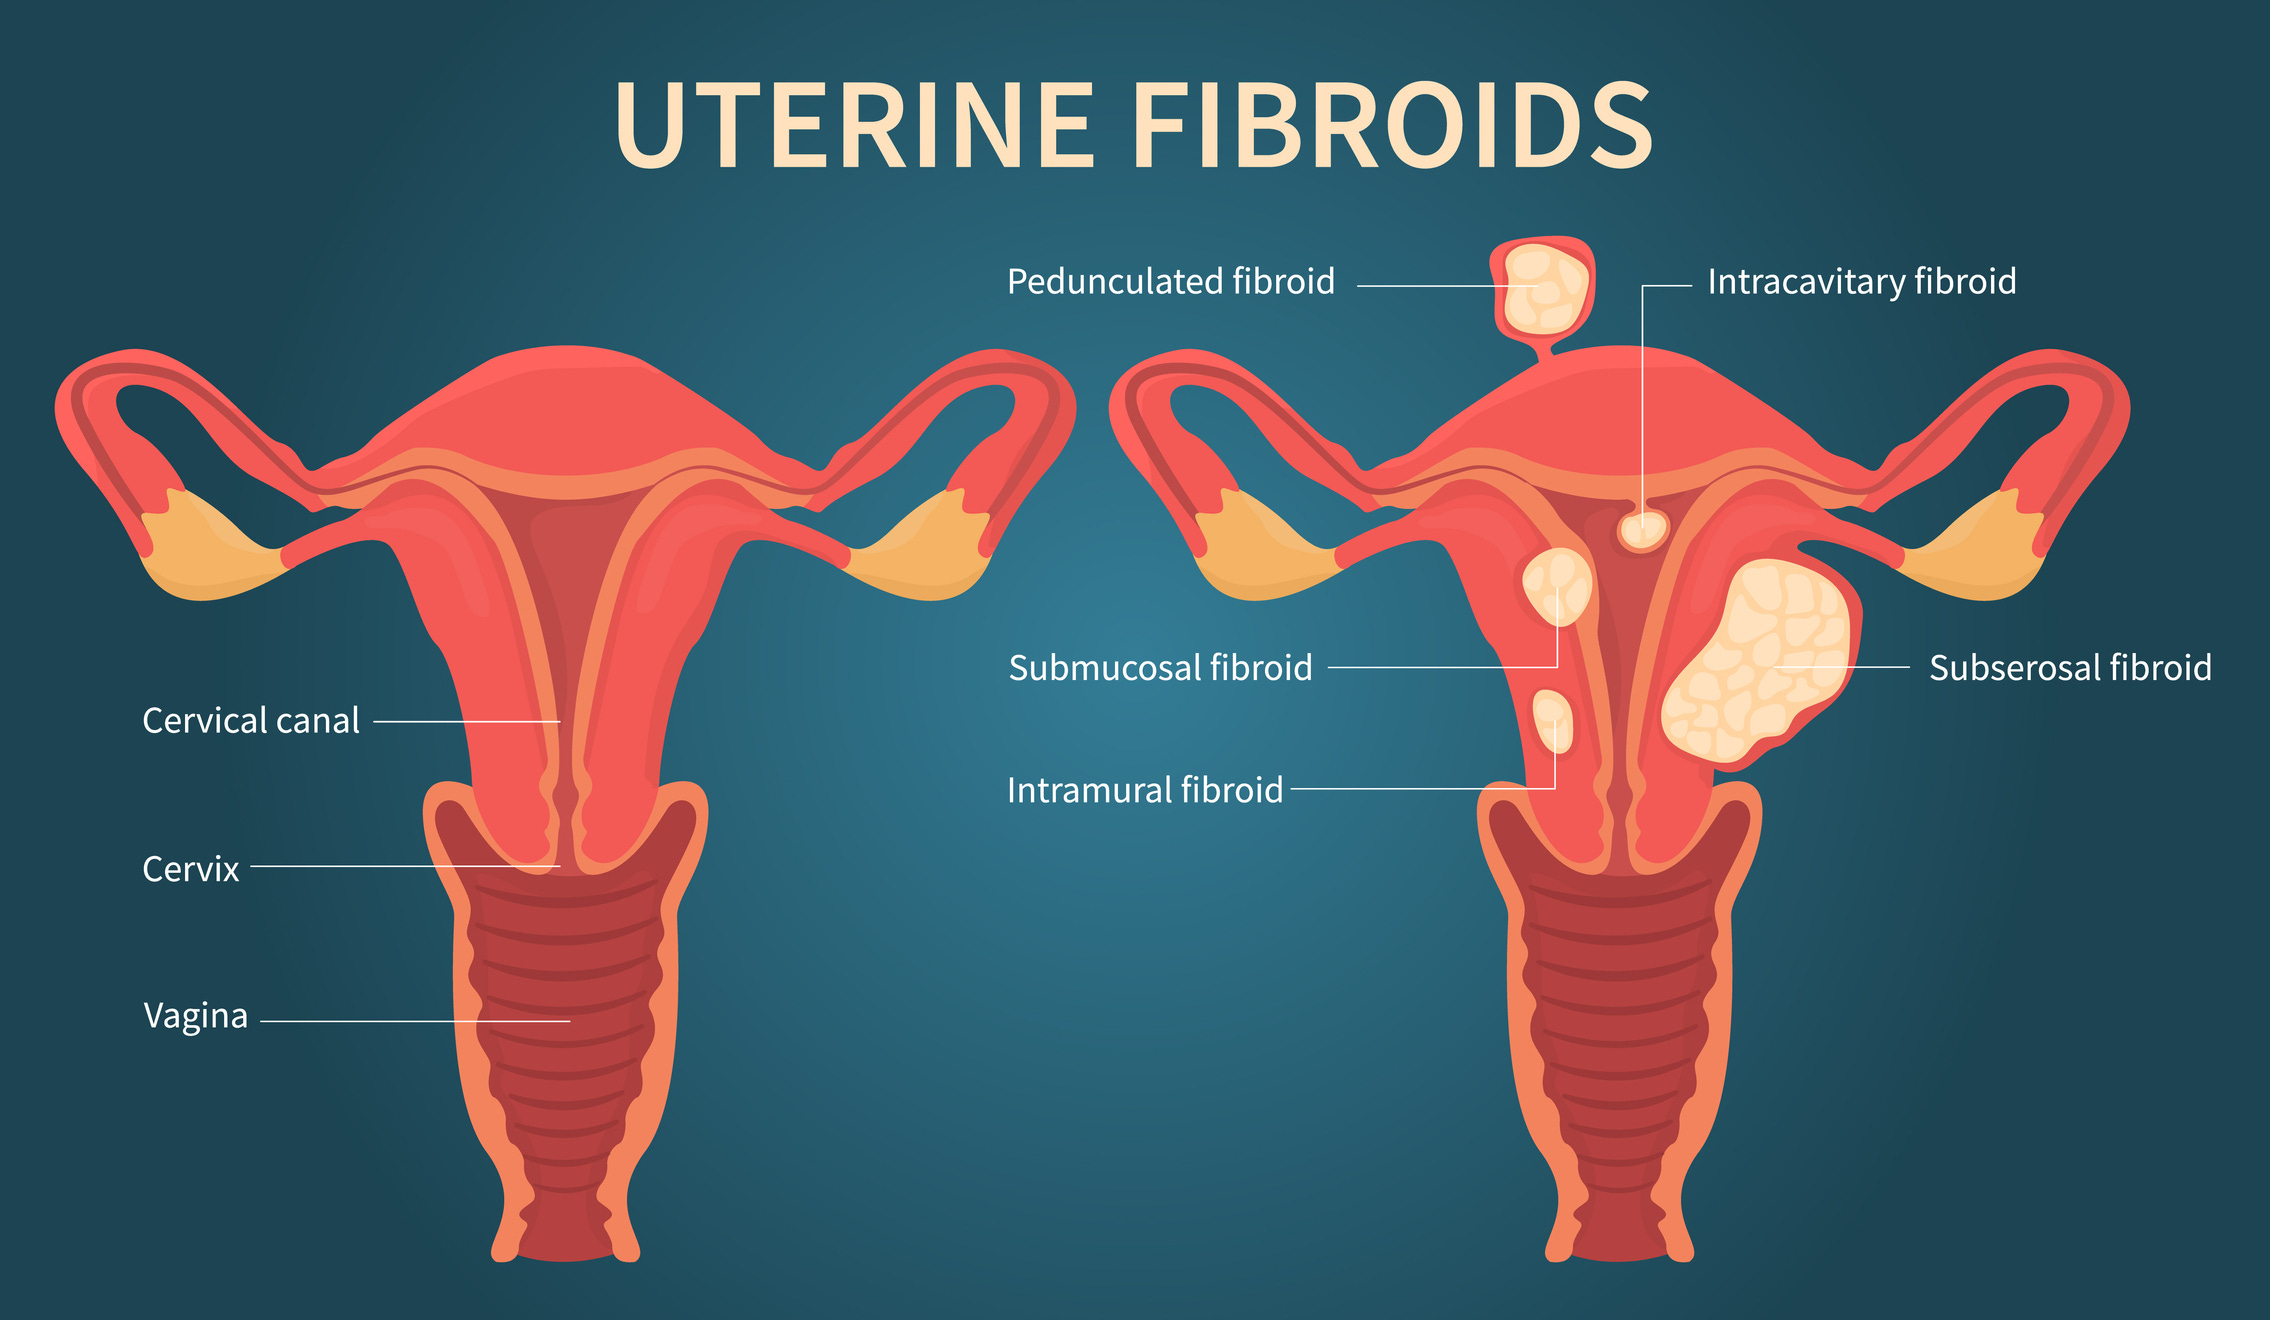 Black women start to talk about uterine fibroids, a condition many get but  few speak about